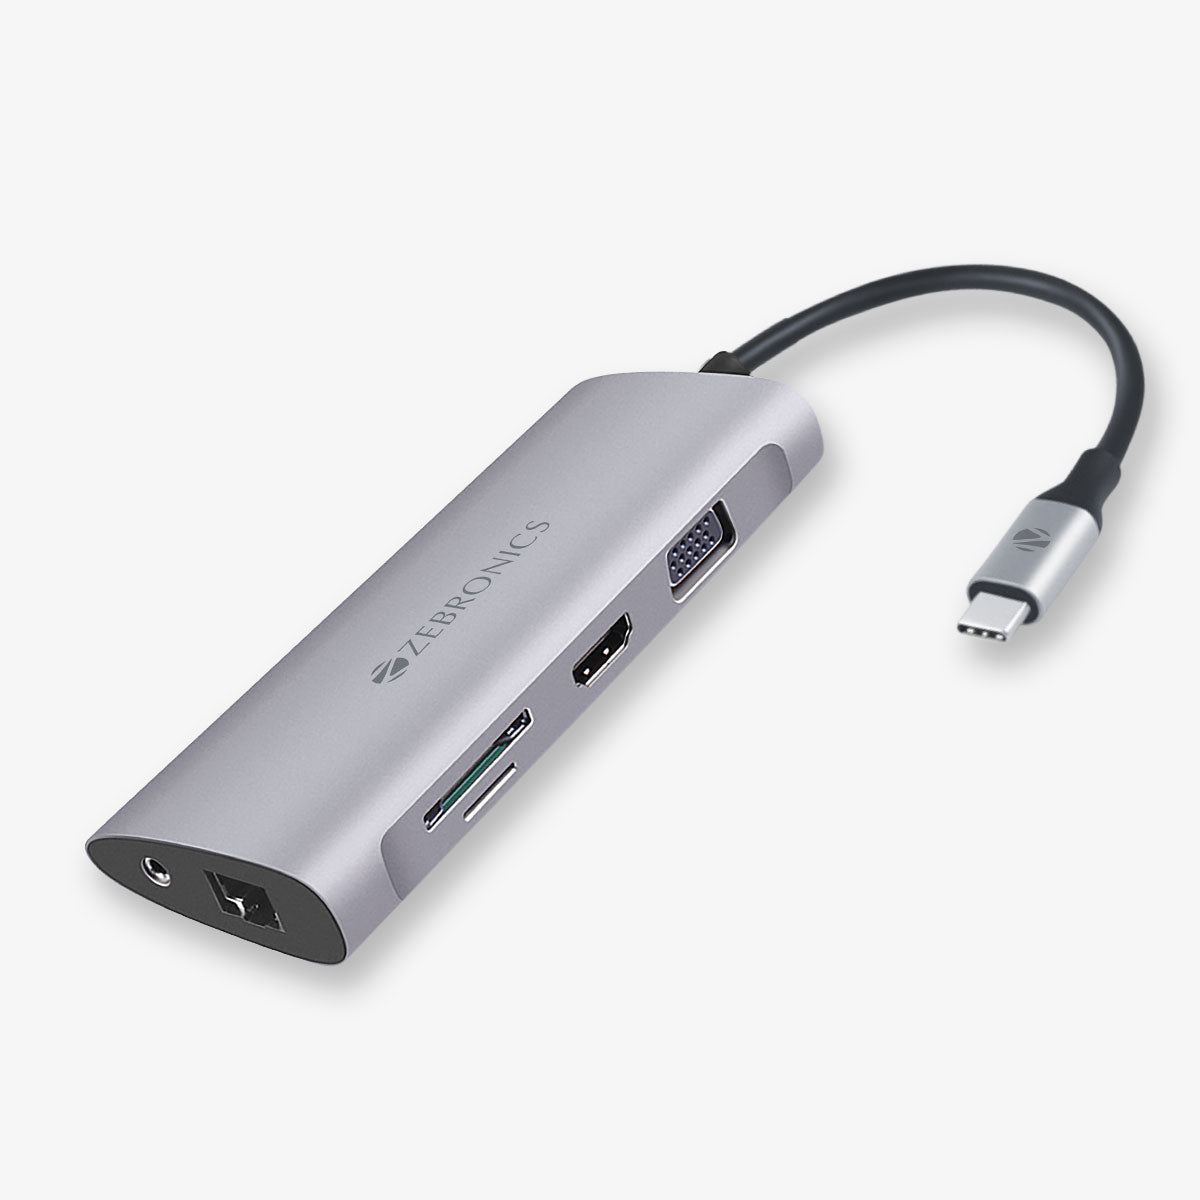 Zeb-TA2000UCLVAP – 11 in 1 USB Type C Multiport Adapter with USB, HDMI, VGA, 3.5mm, RJ45, SD, Micro SD, Type C PD - Zebronics